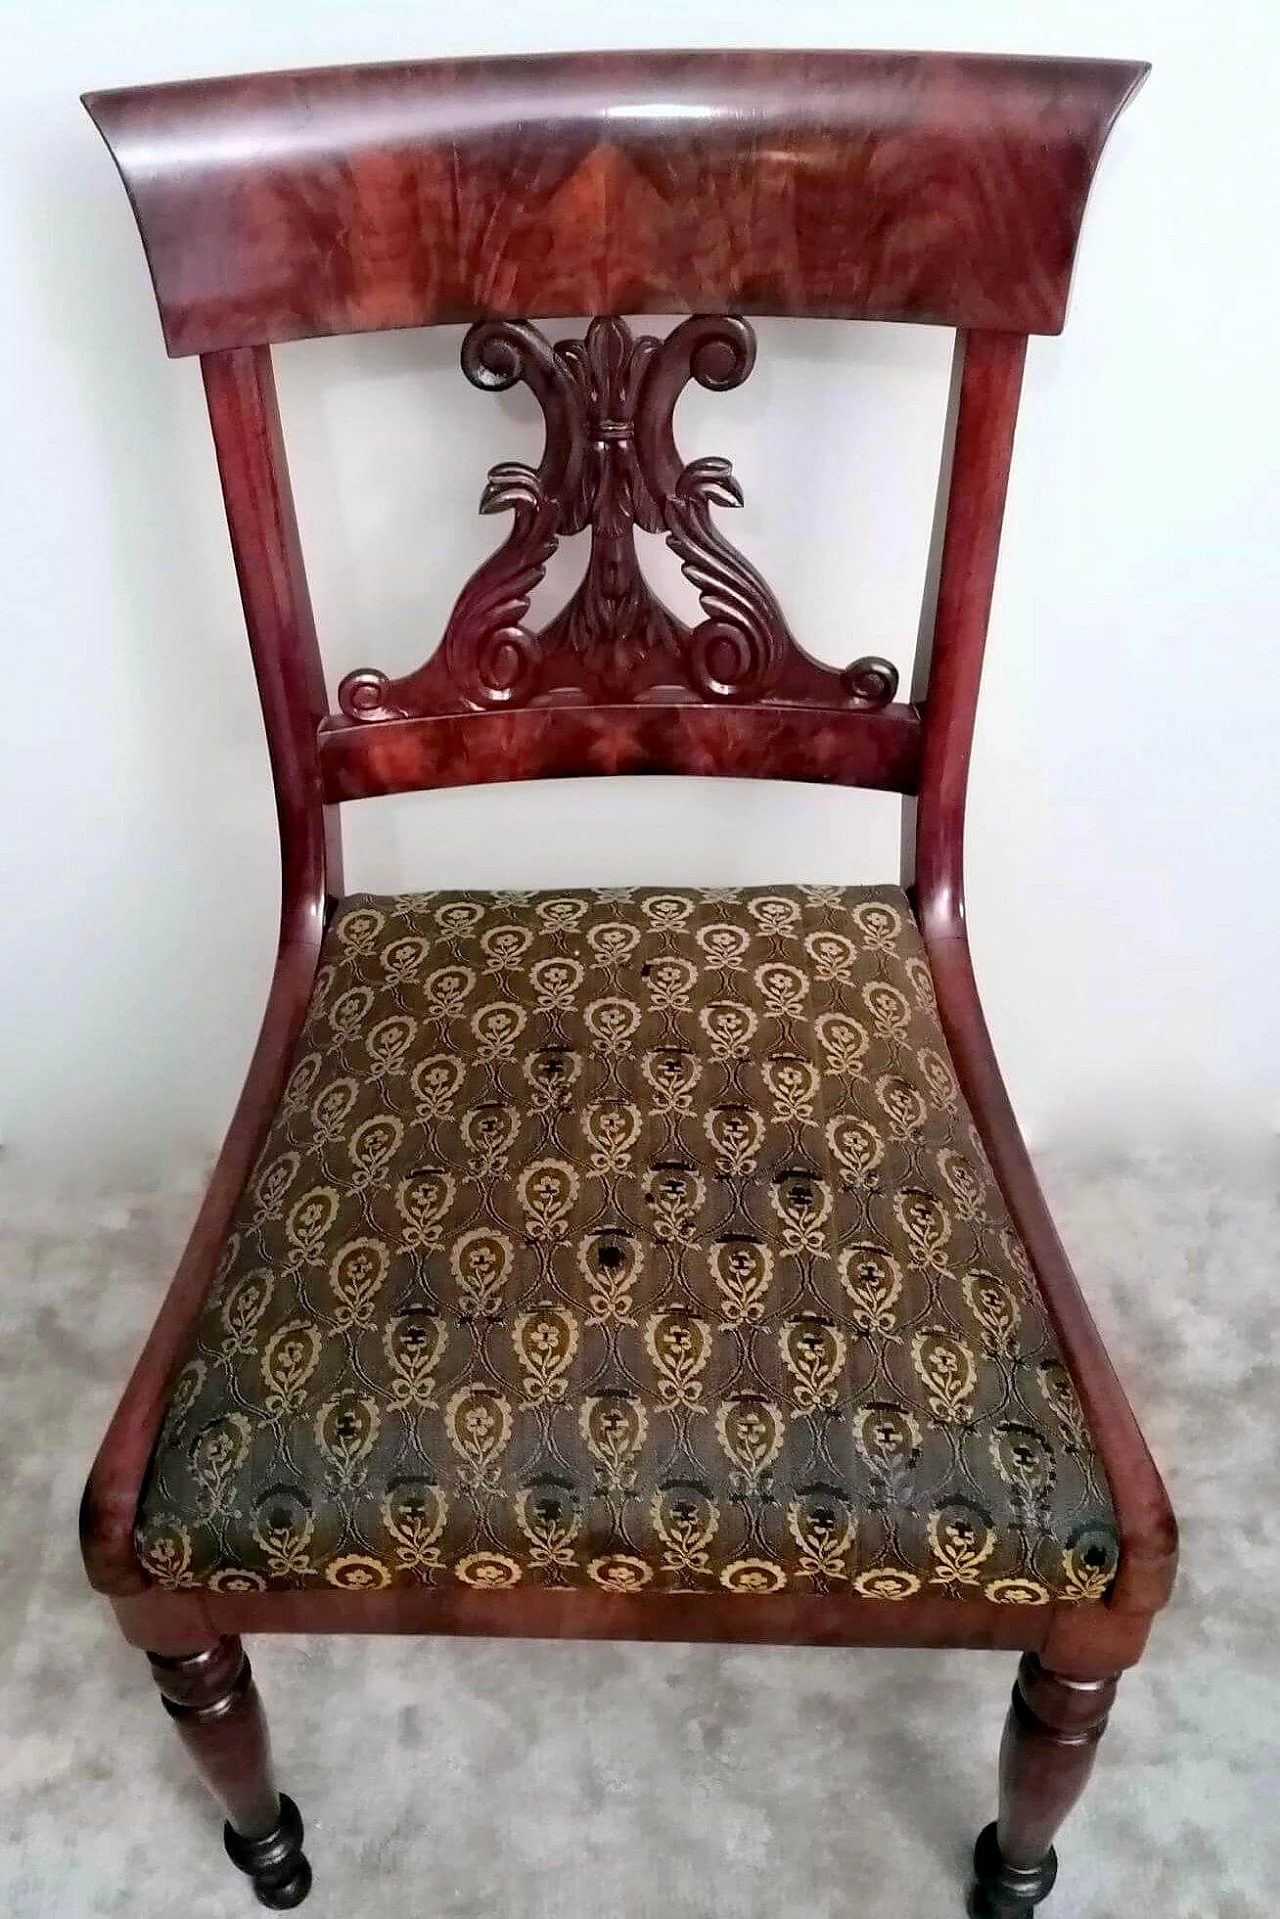 Biedermeier style chair in wood and fabric, 19th century 1466142